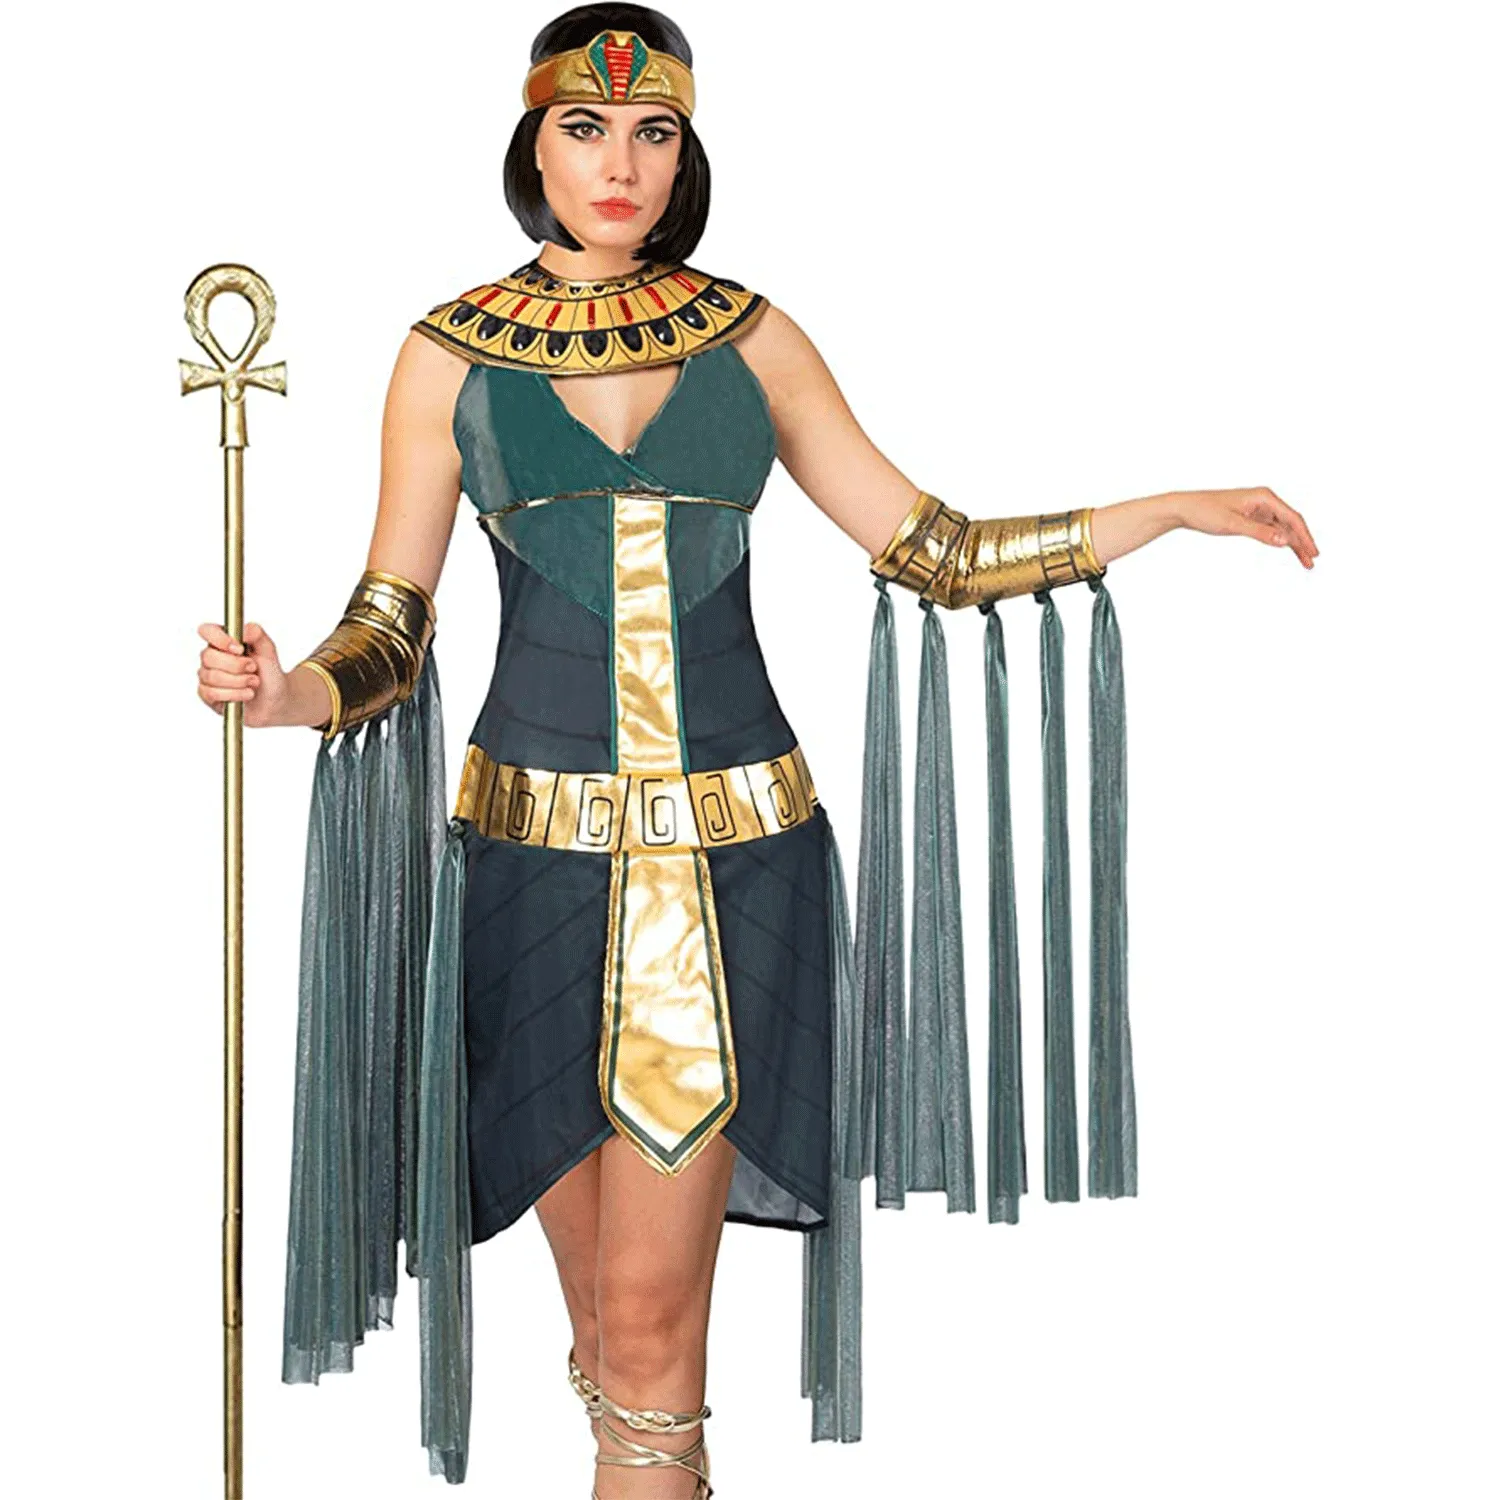 You are currently viewing 2022 best halloween costumes for women collection